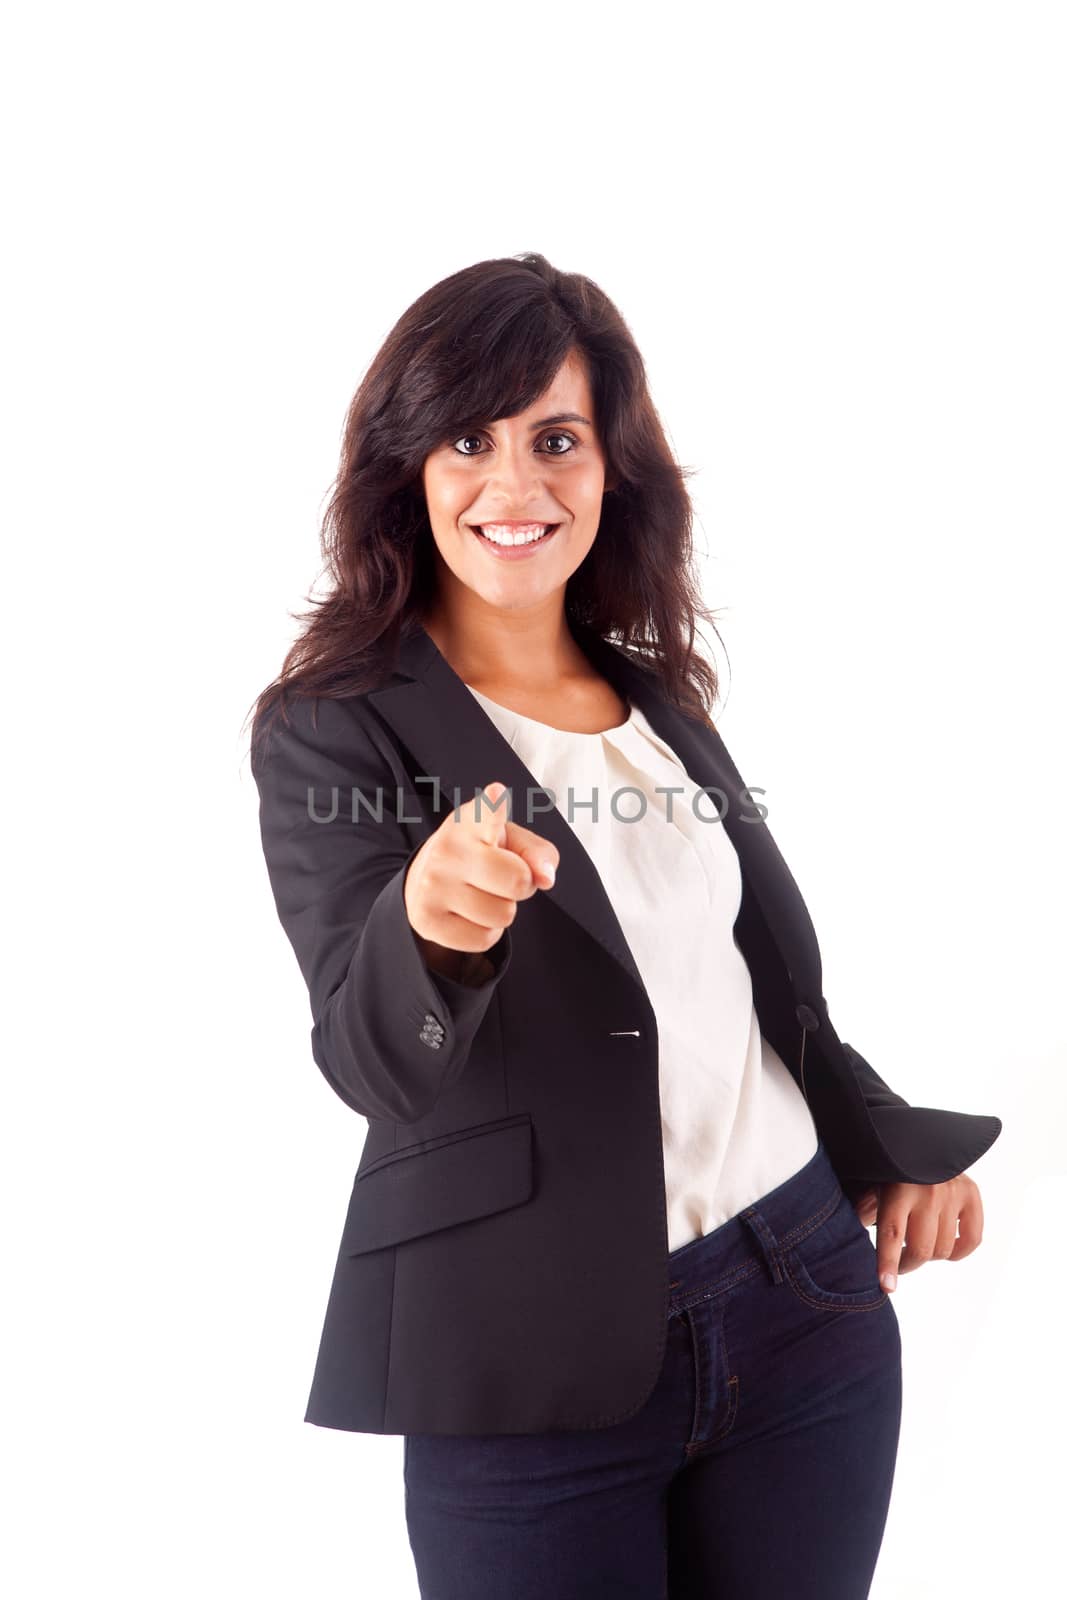 Smiling woman pointing up over white background